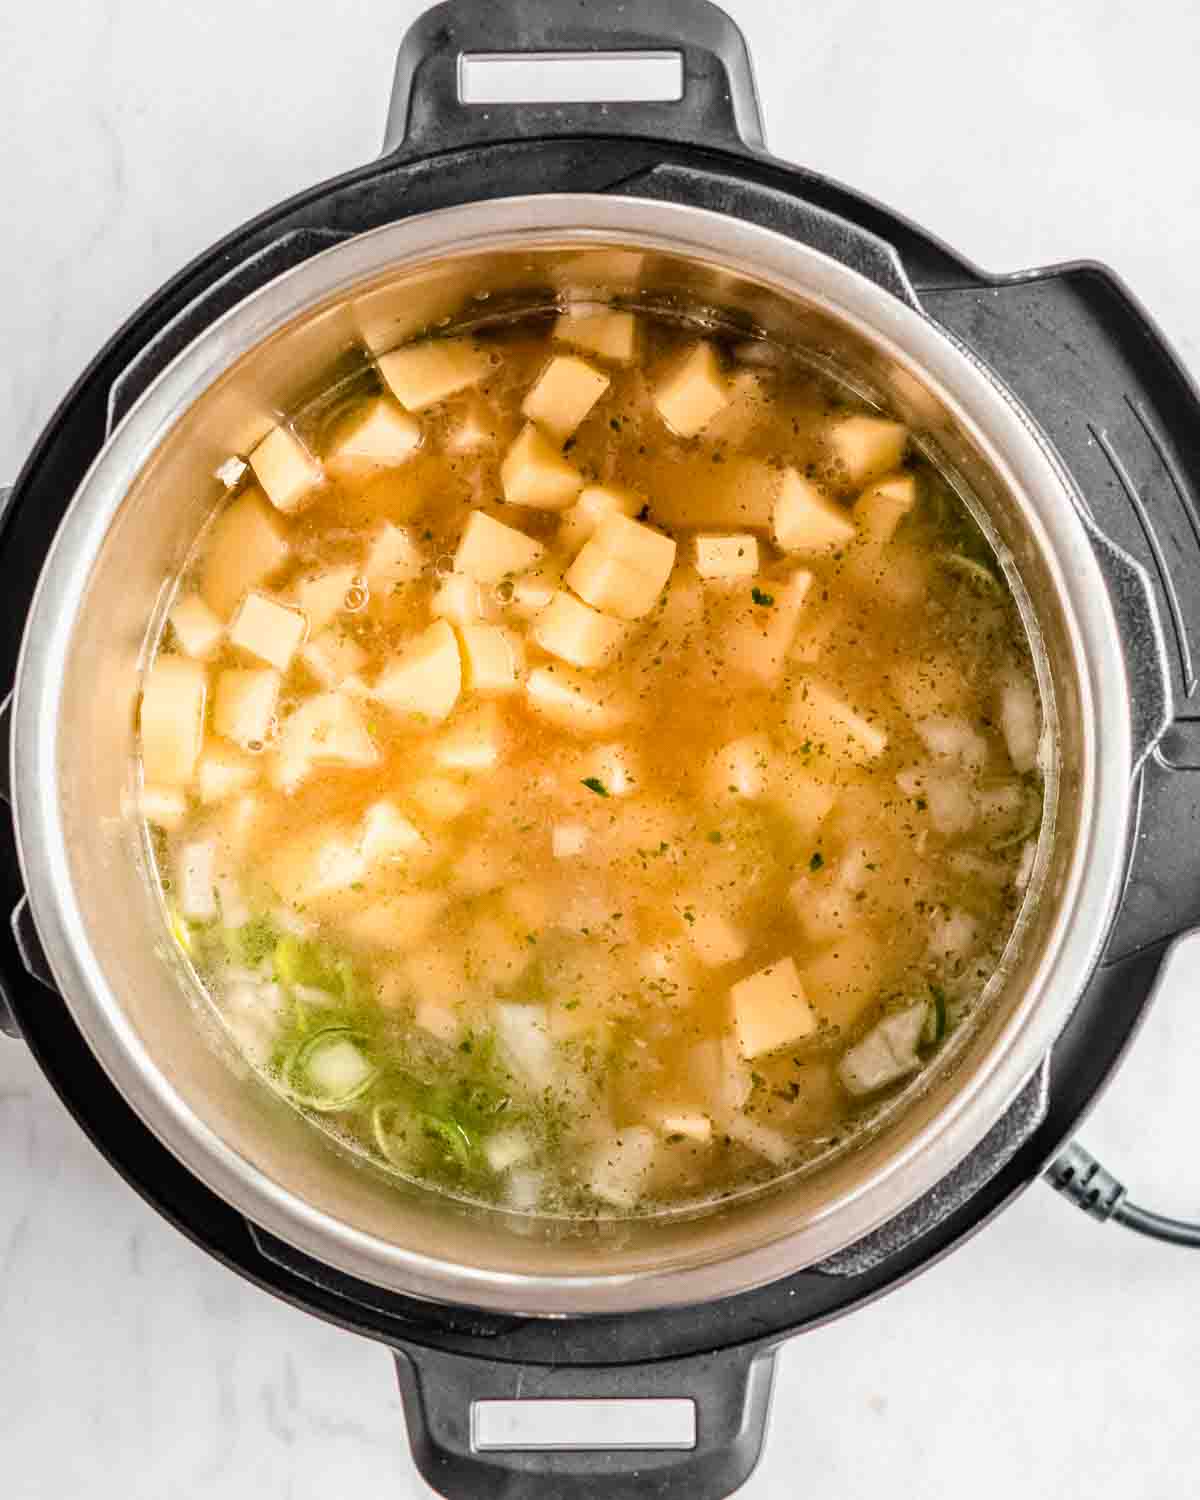 sauteed onion, garlic and leek in a the instant pot, with salt, pepper, potato cubes and veggie broth added